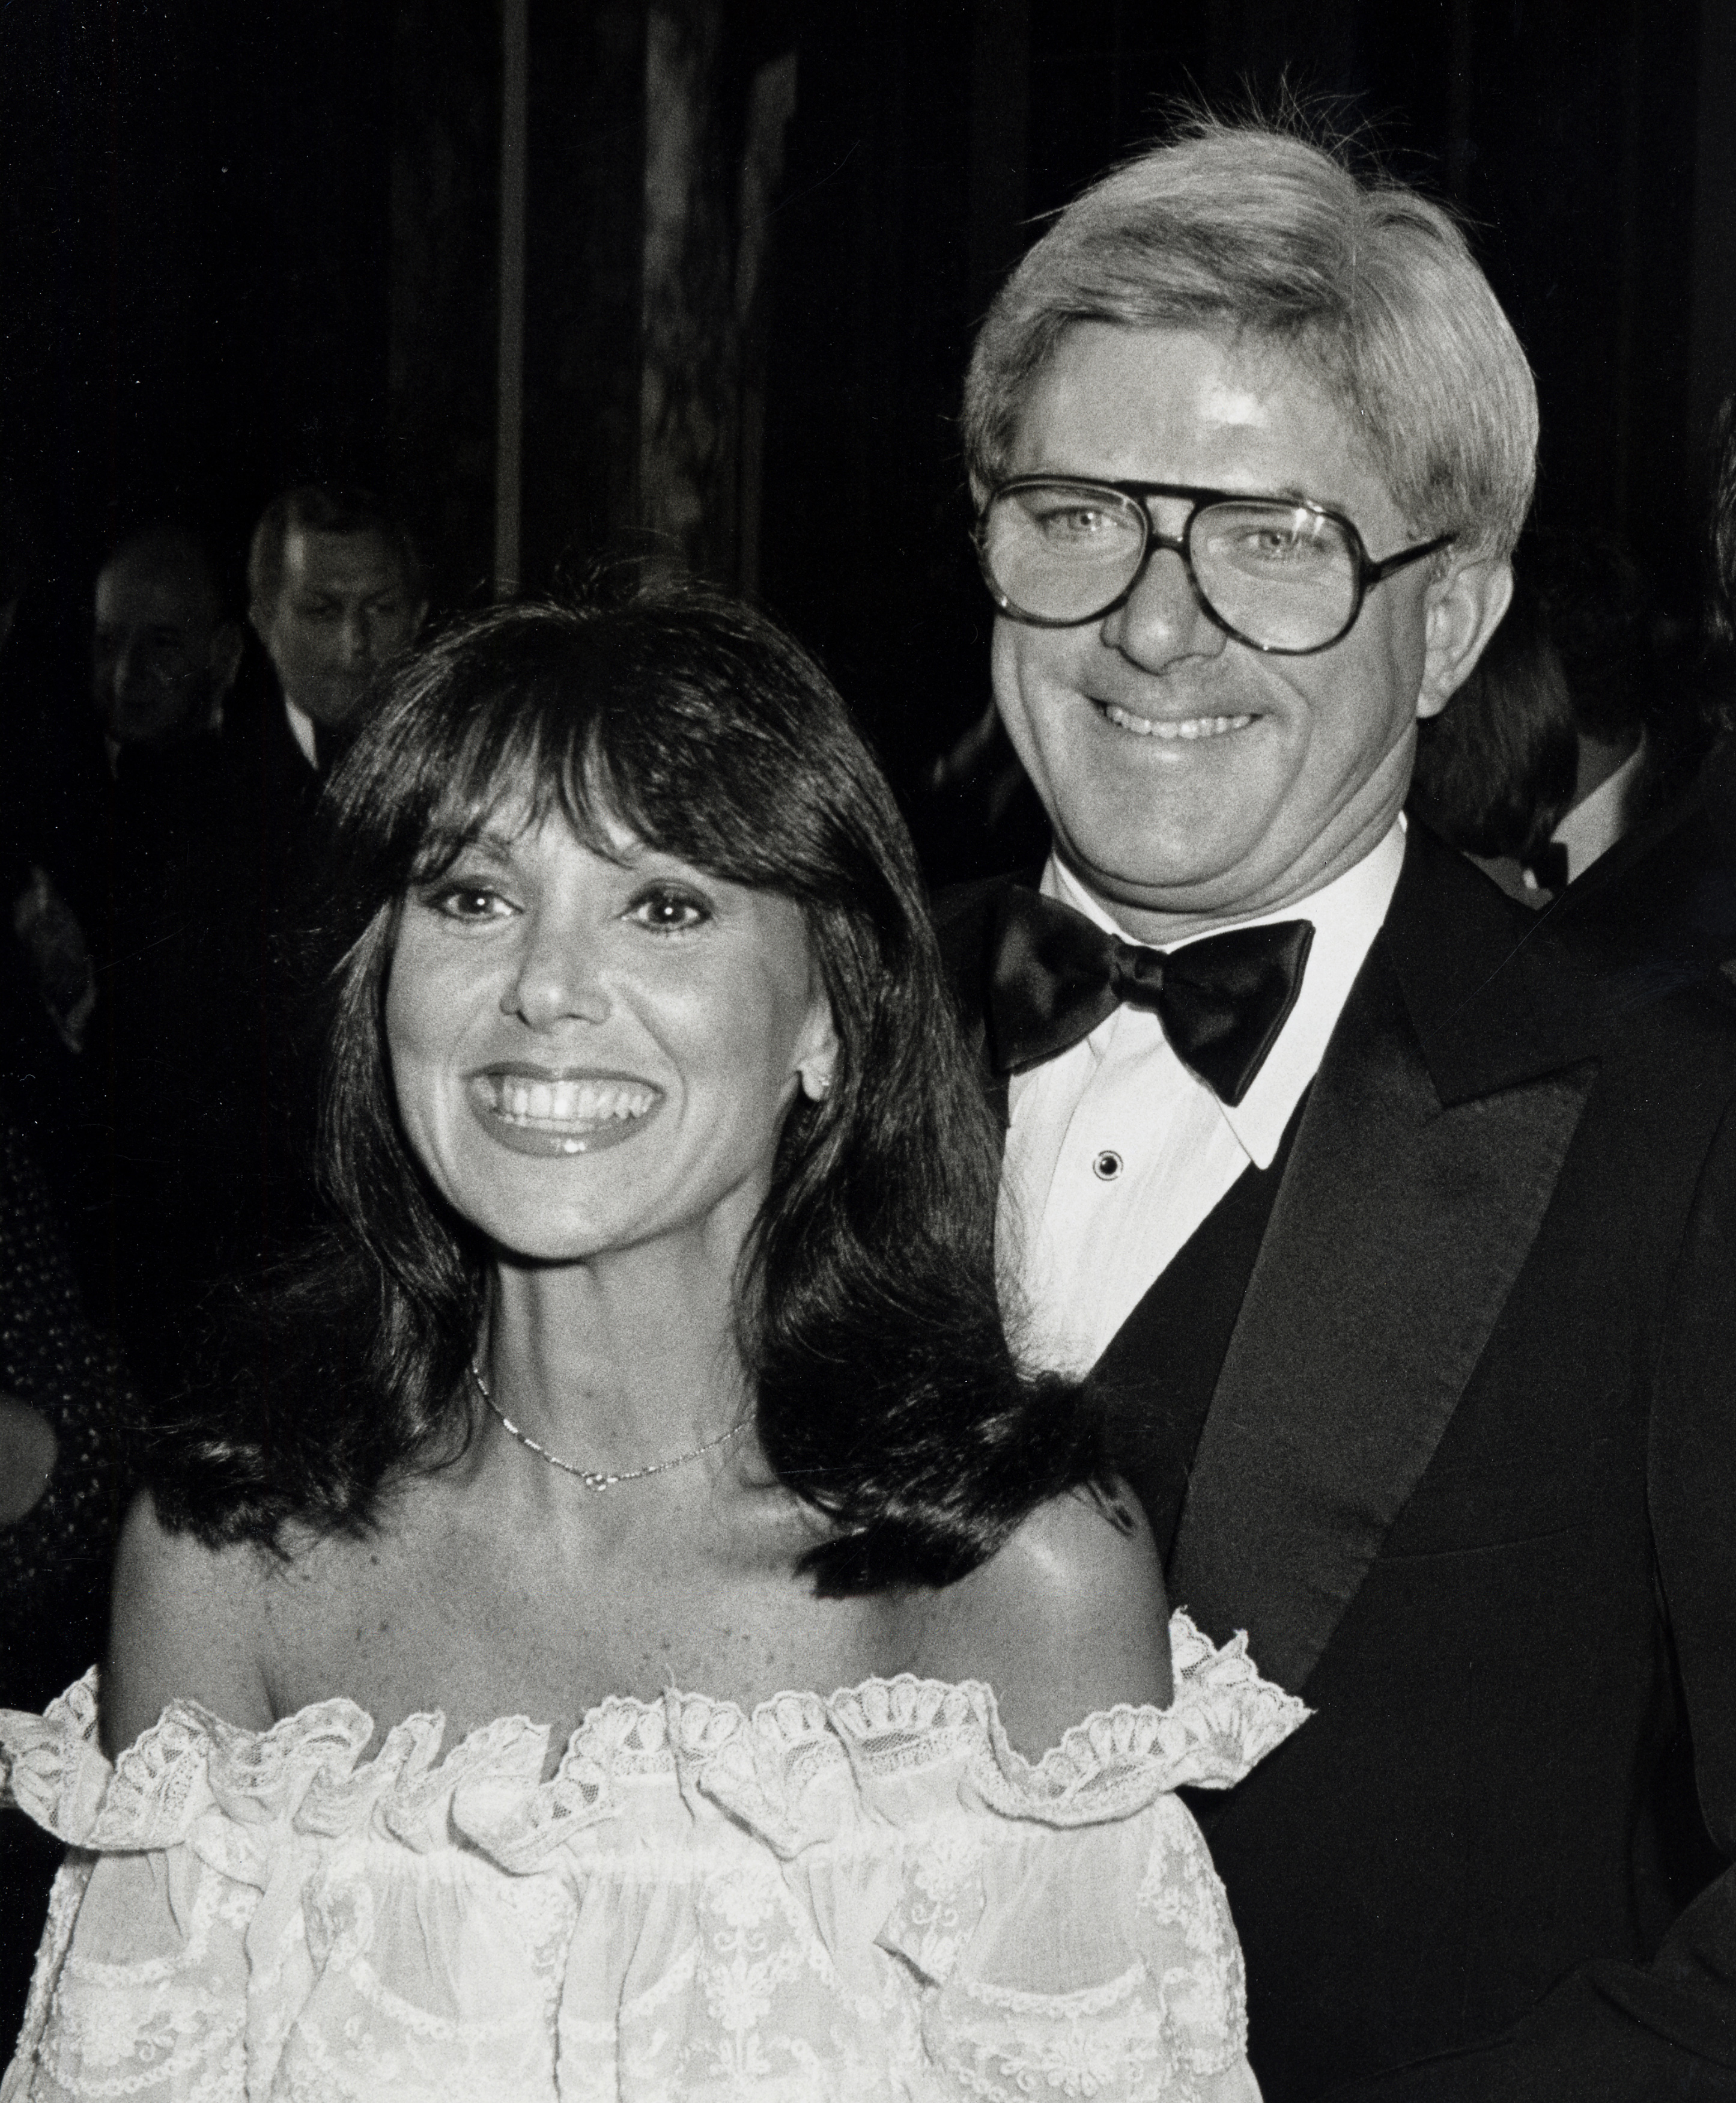 Marlo Thomas and Phil Donahue at the Friars Club in New York City, 1981 | Source: Getty Images